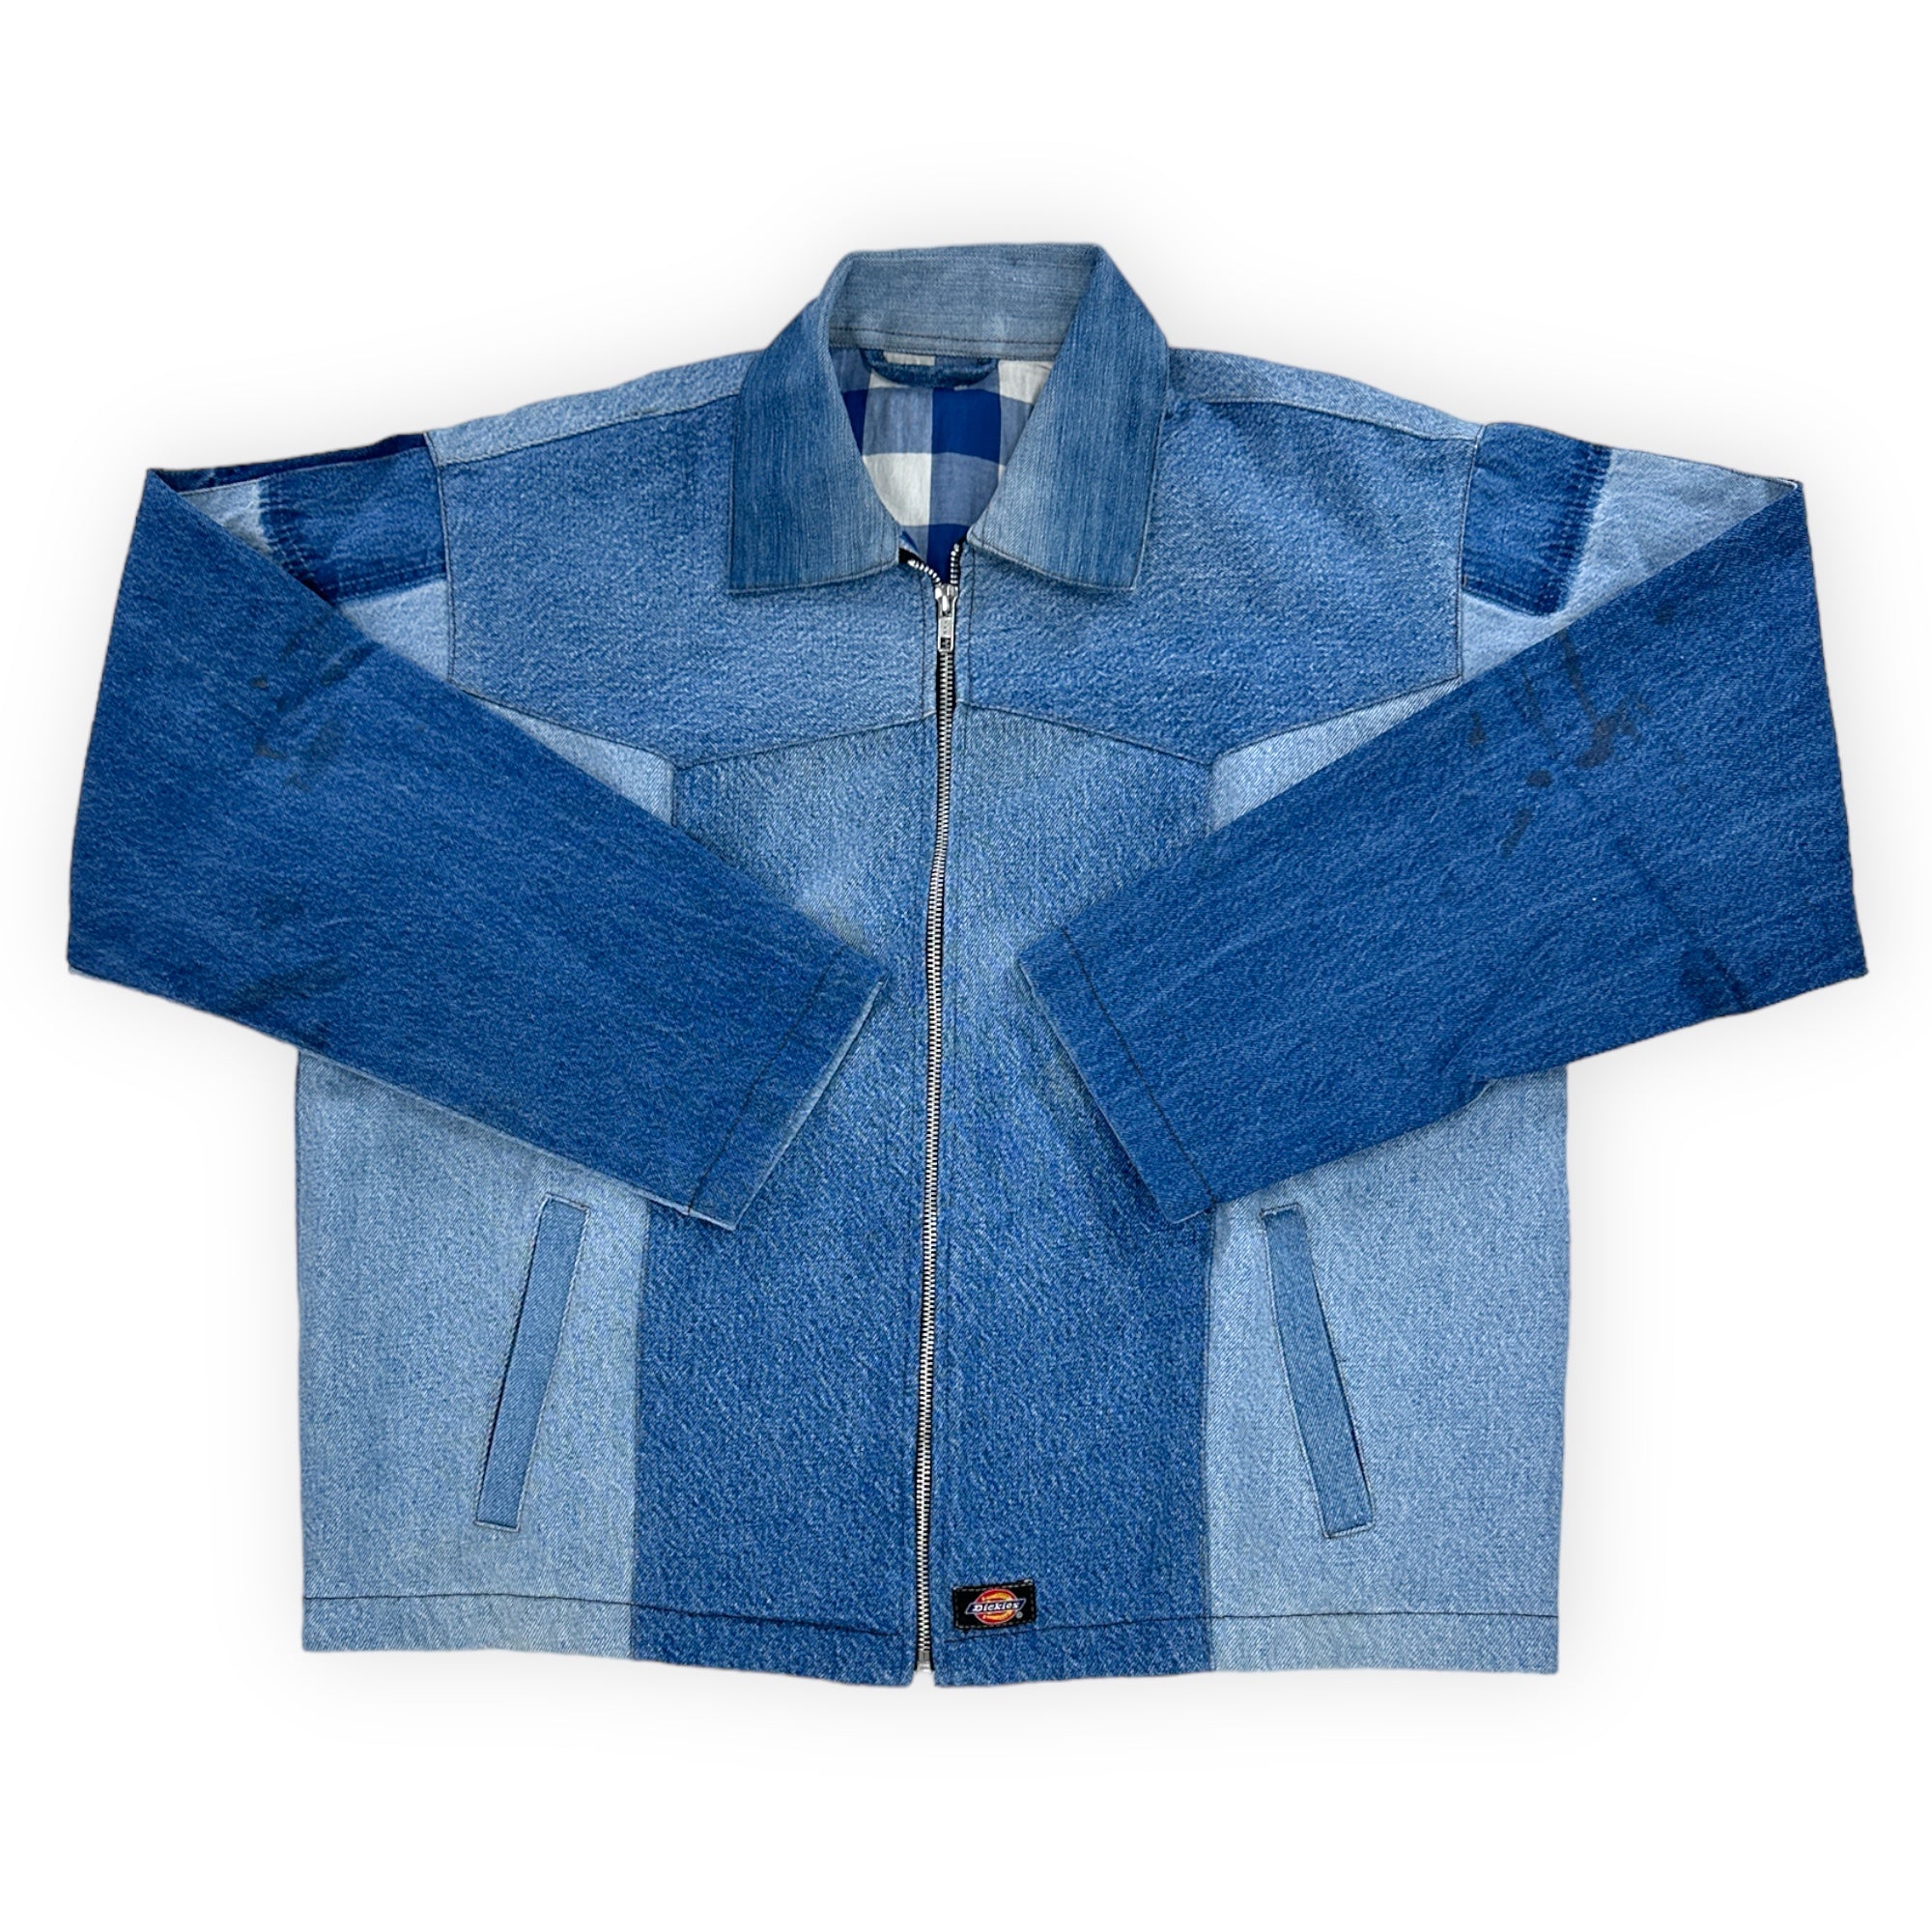 Men's Chore Coat Made From Upcycled Work Jeans - Large